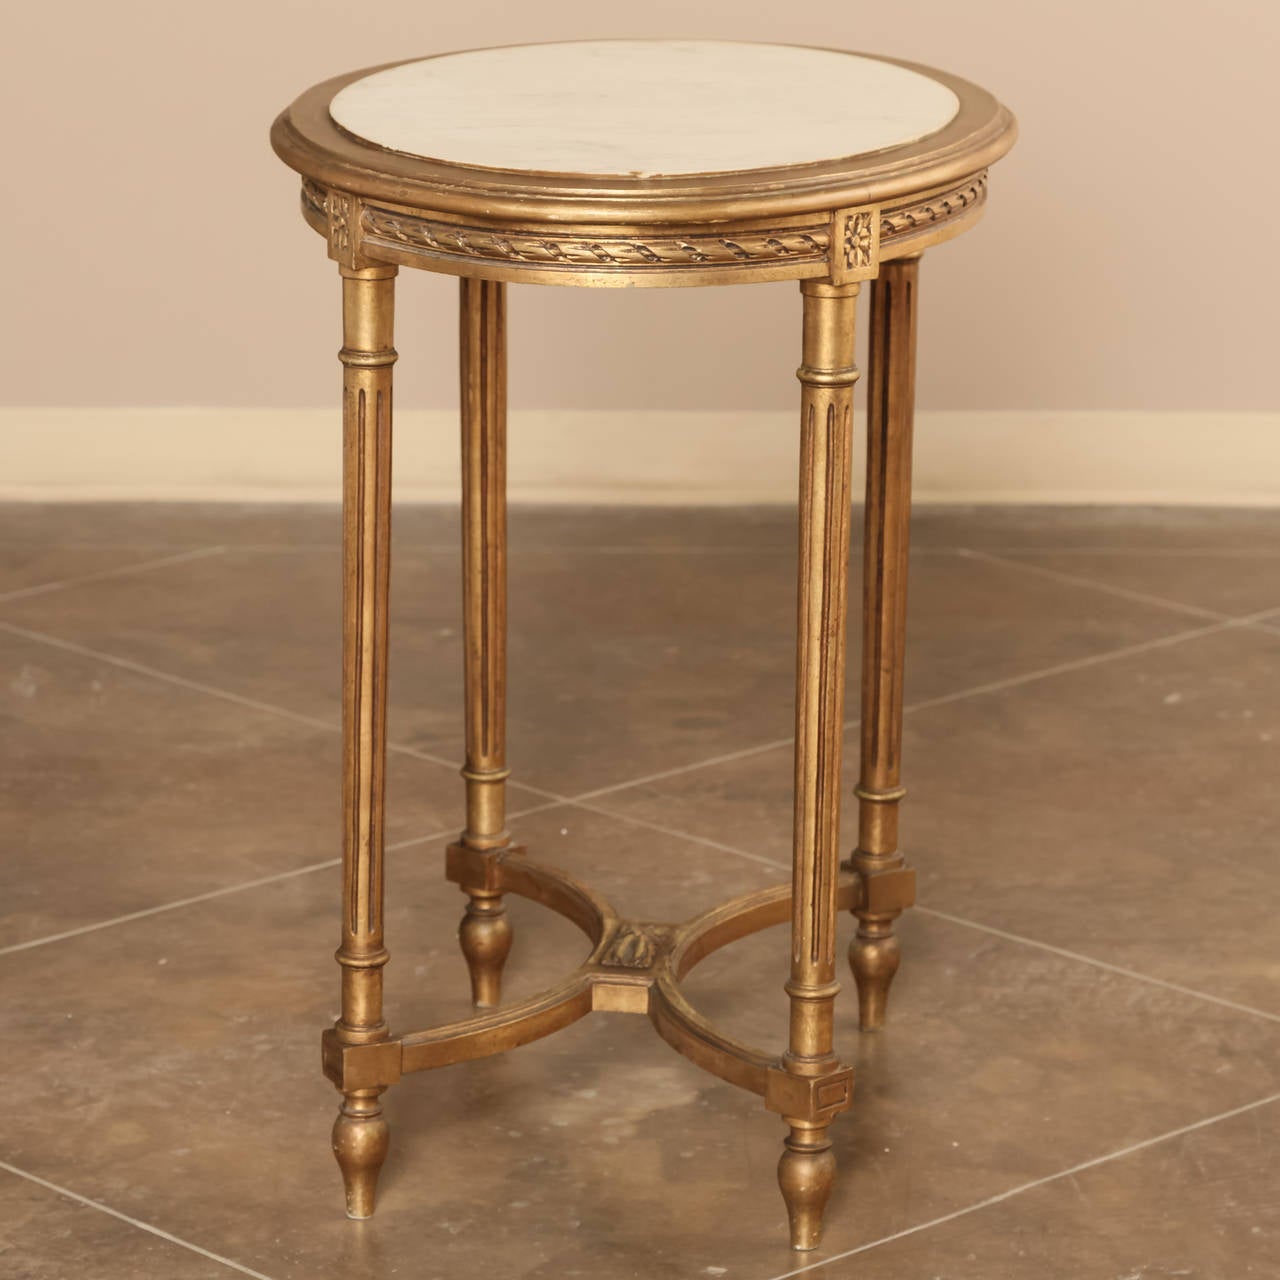 French Antique Louis XVI Giltwood Marble-Top Table